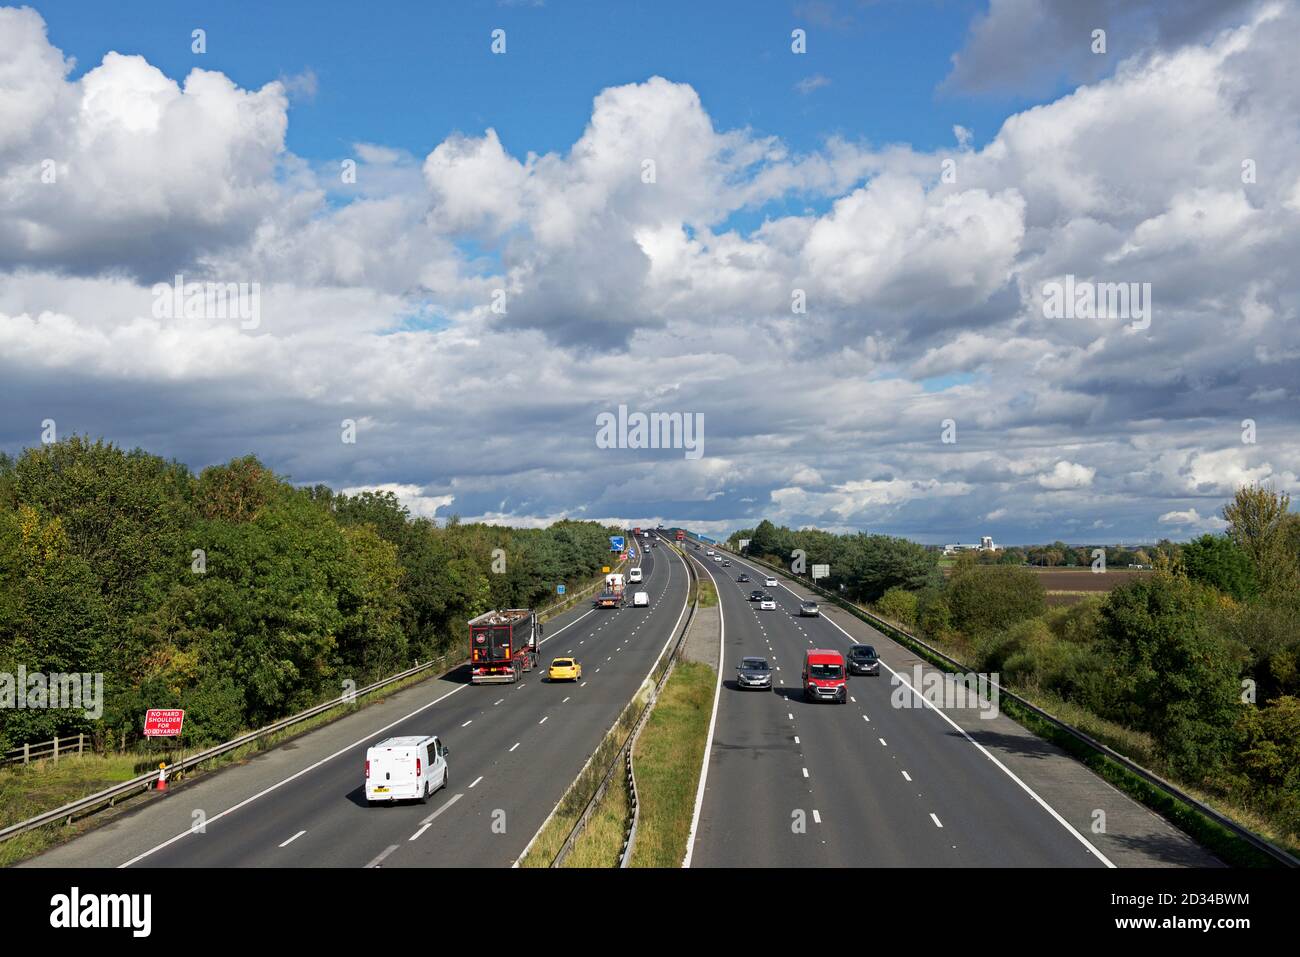 Traffic on the M62 motorway, as it crosses the River Ouse on the Ouse Bridge, between Howden and Goole, East Yorkshire, England UK Stock Photo